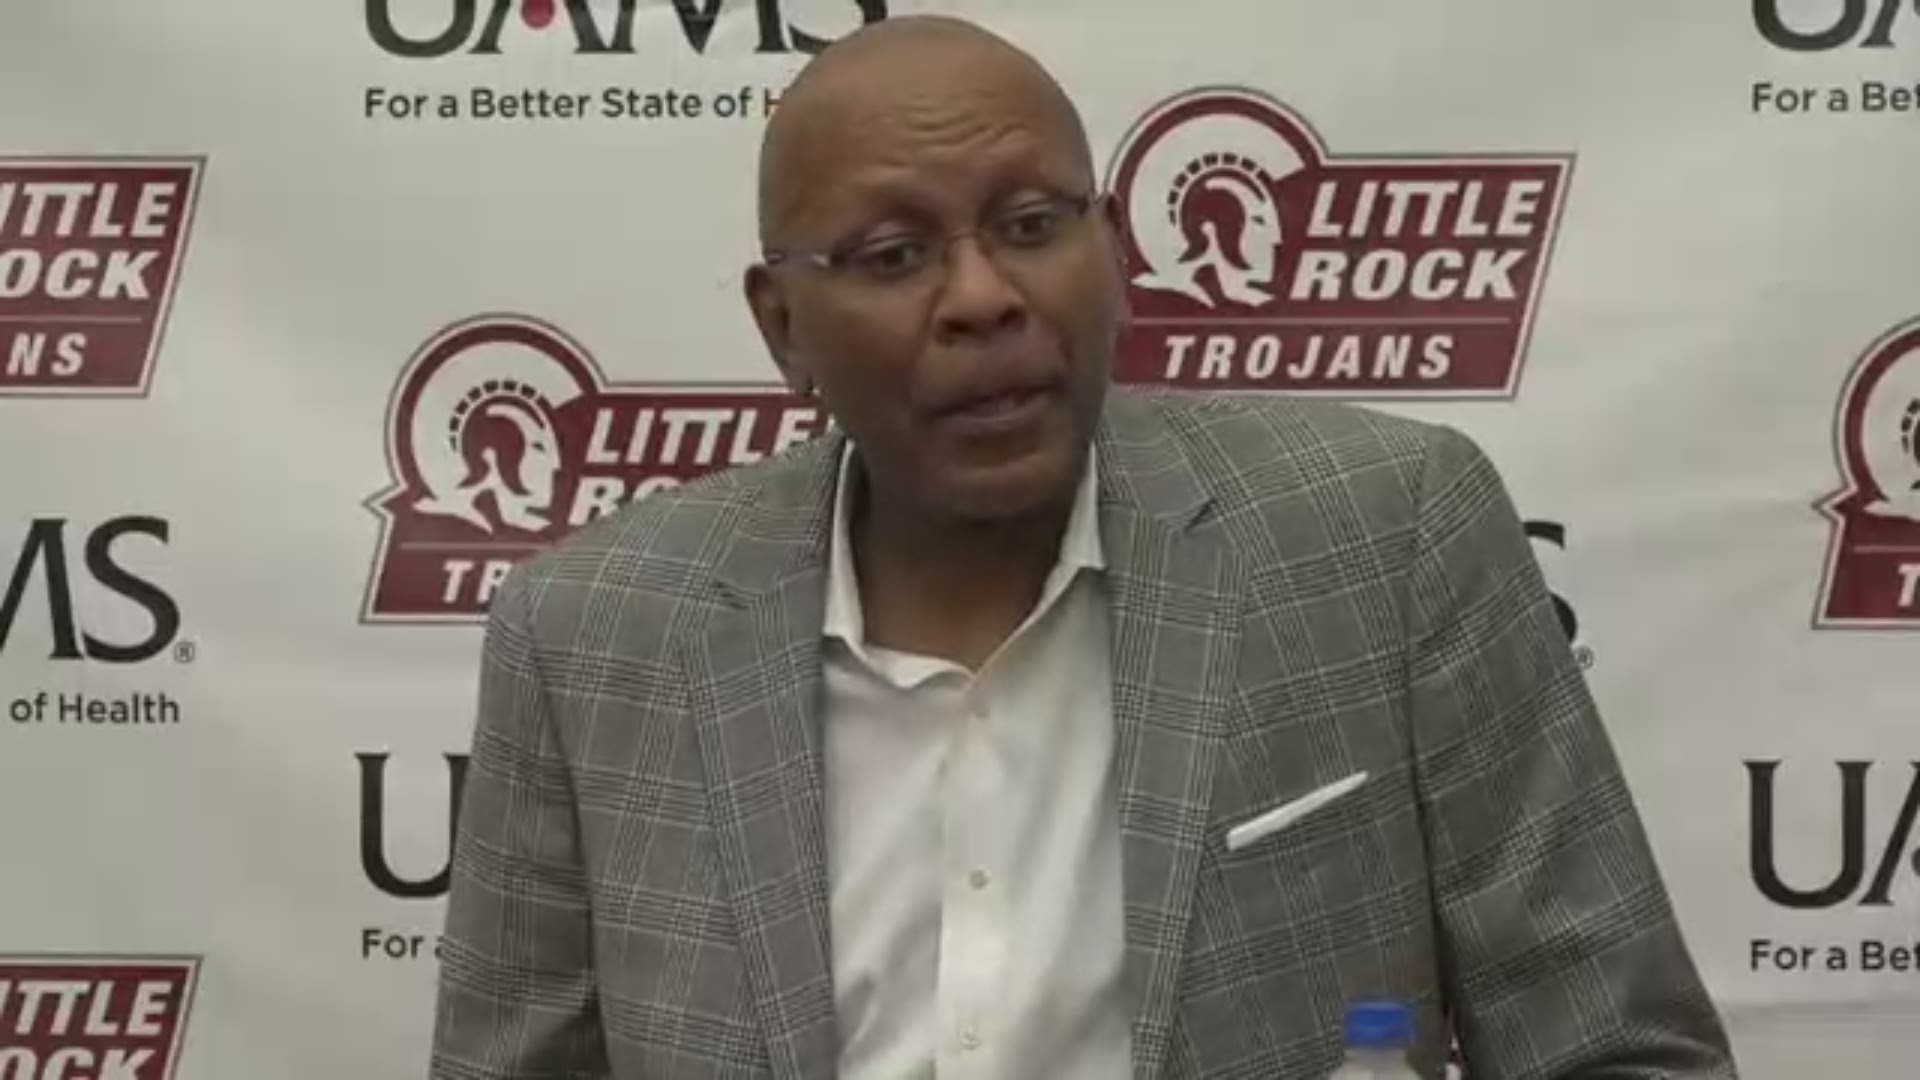 Little Rock withstood a late game rally to edge Arkansas State 90-87 Saturday afternoon.